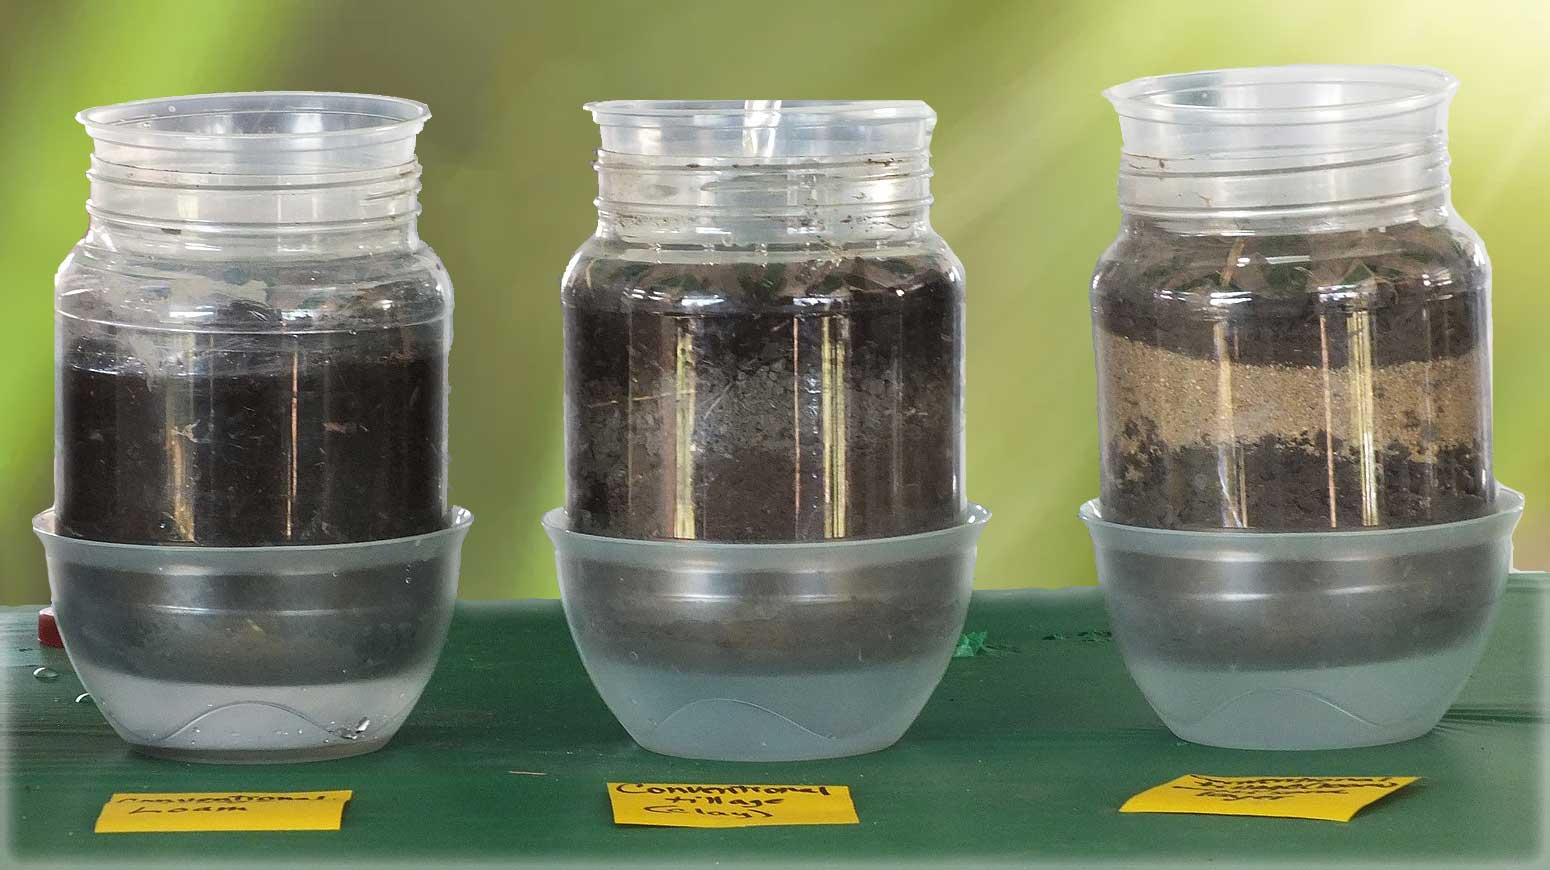 Three clear jars revealing layers of soil and compost.